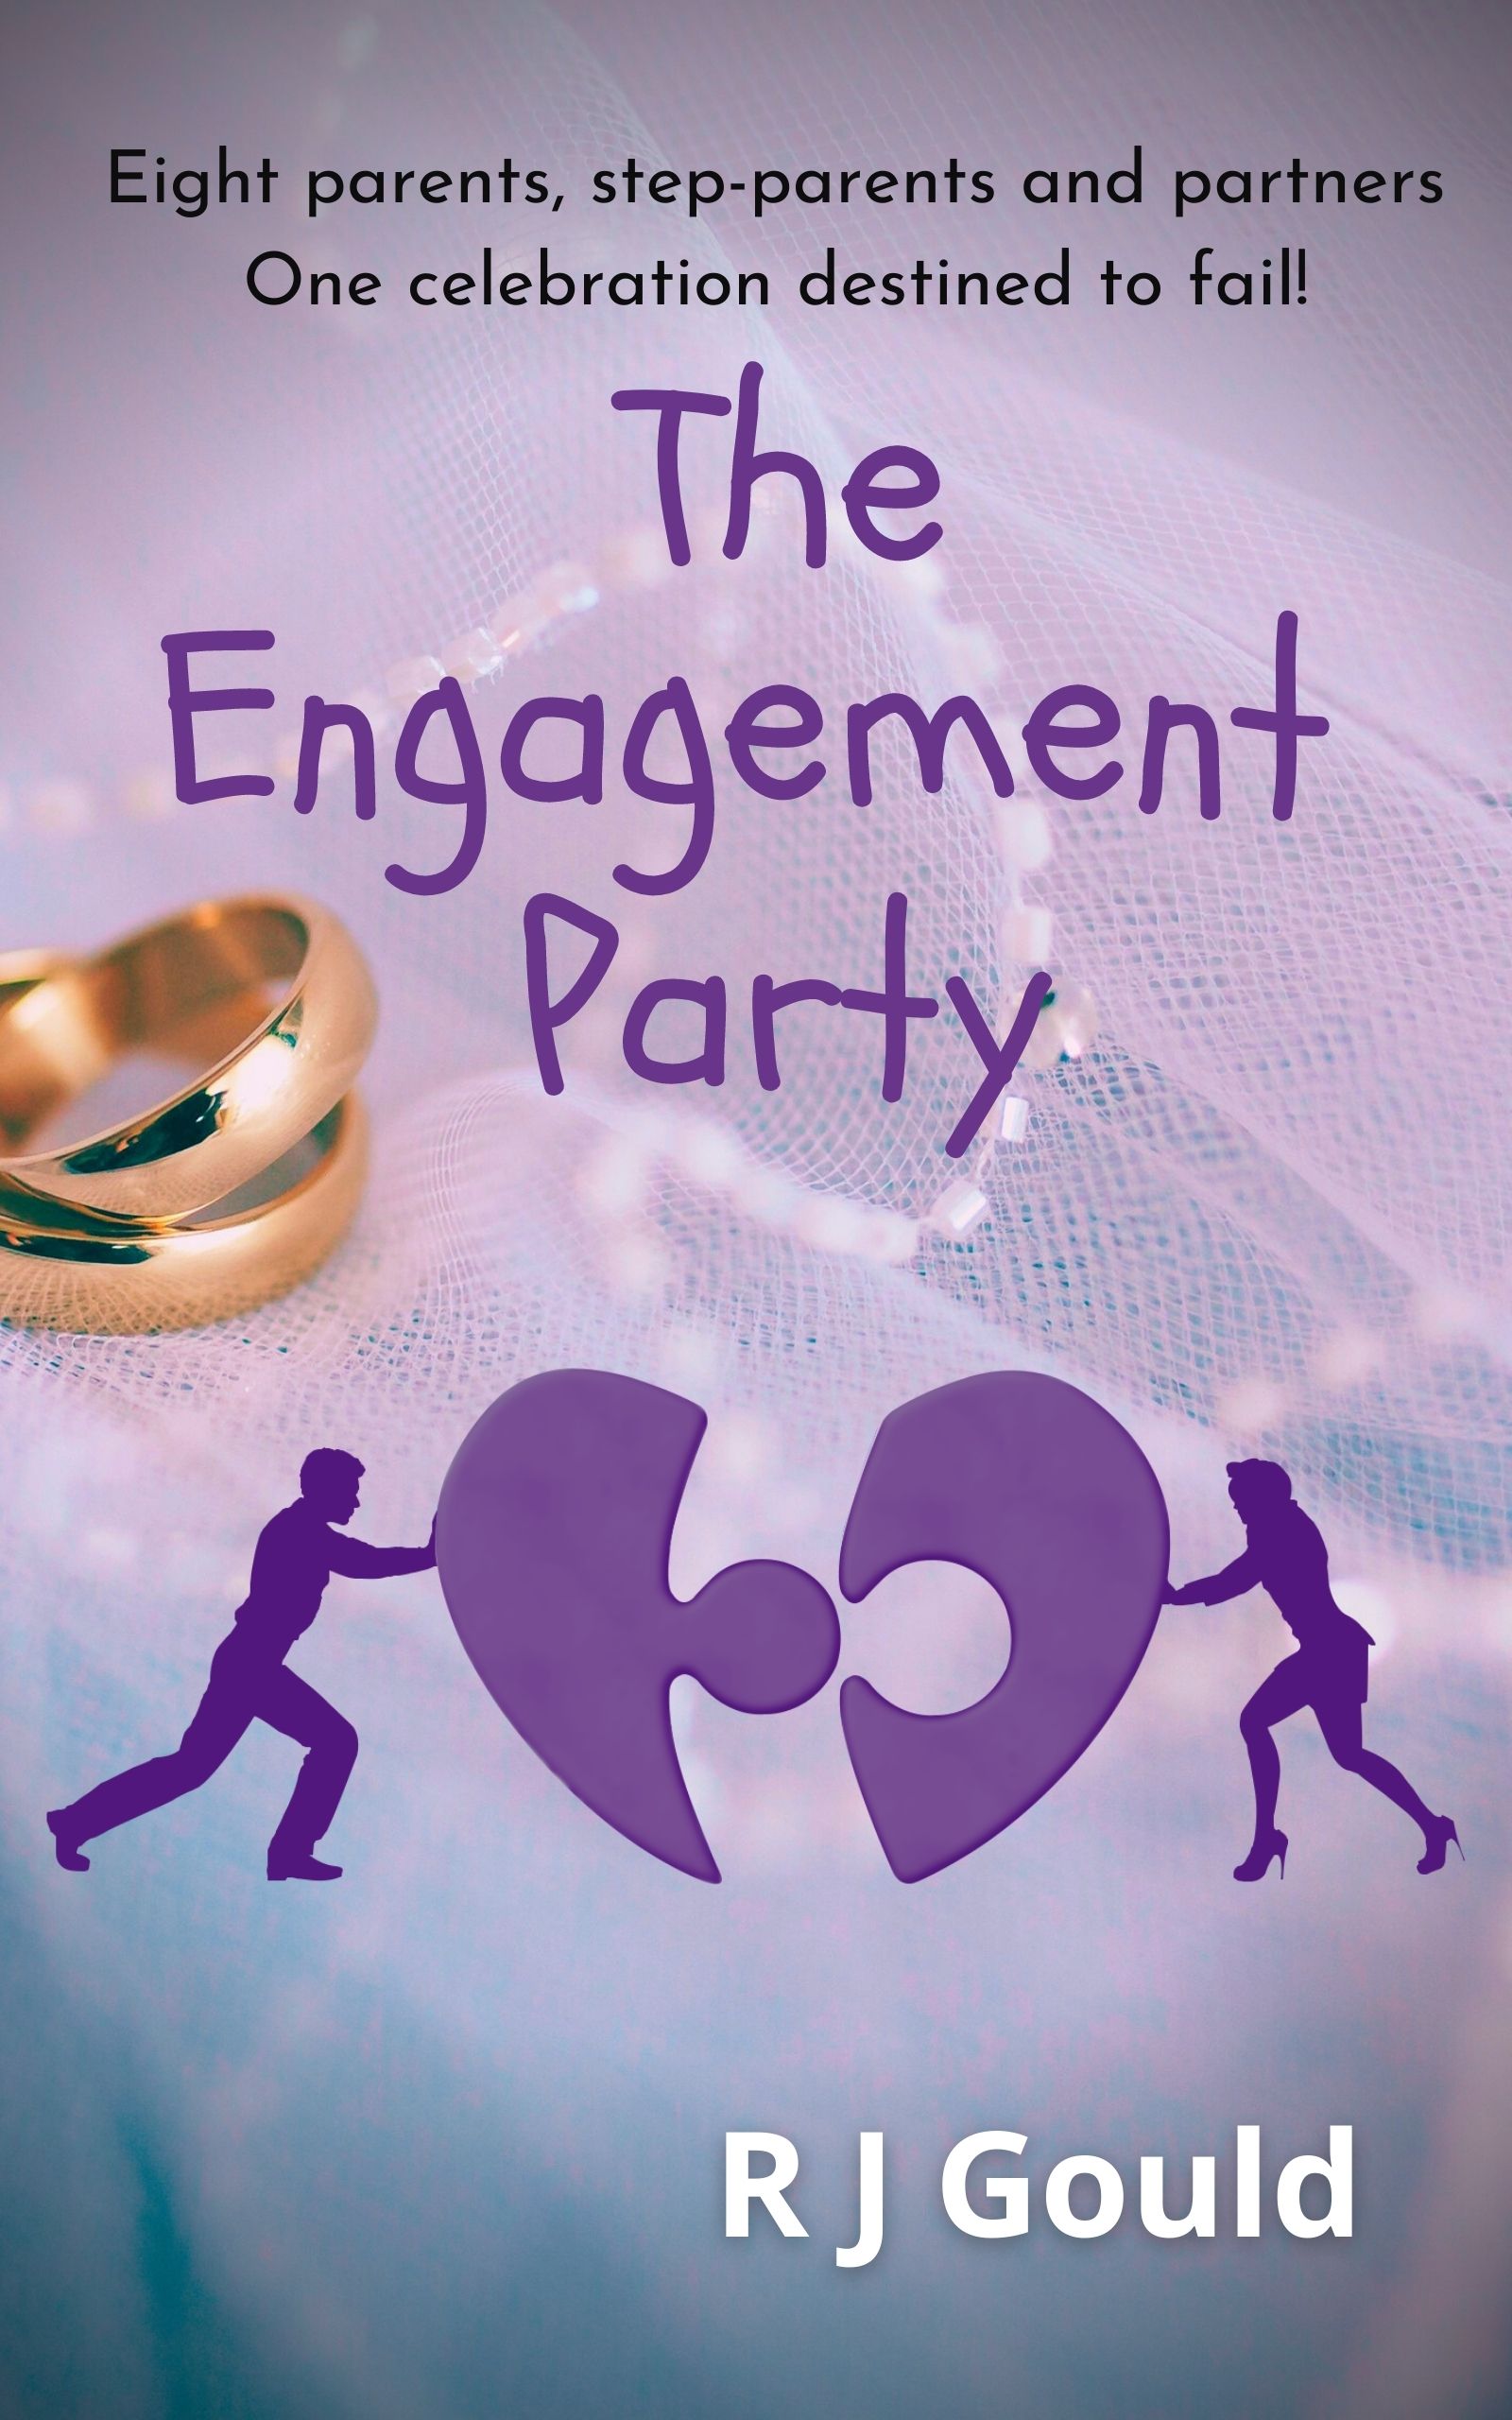 The Engagement Party by RJ Gould